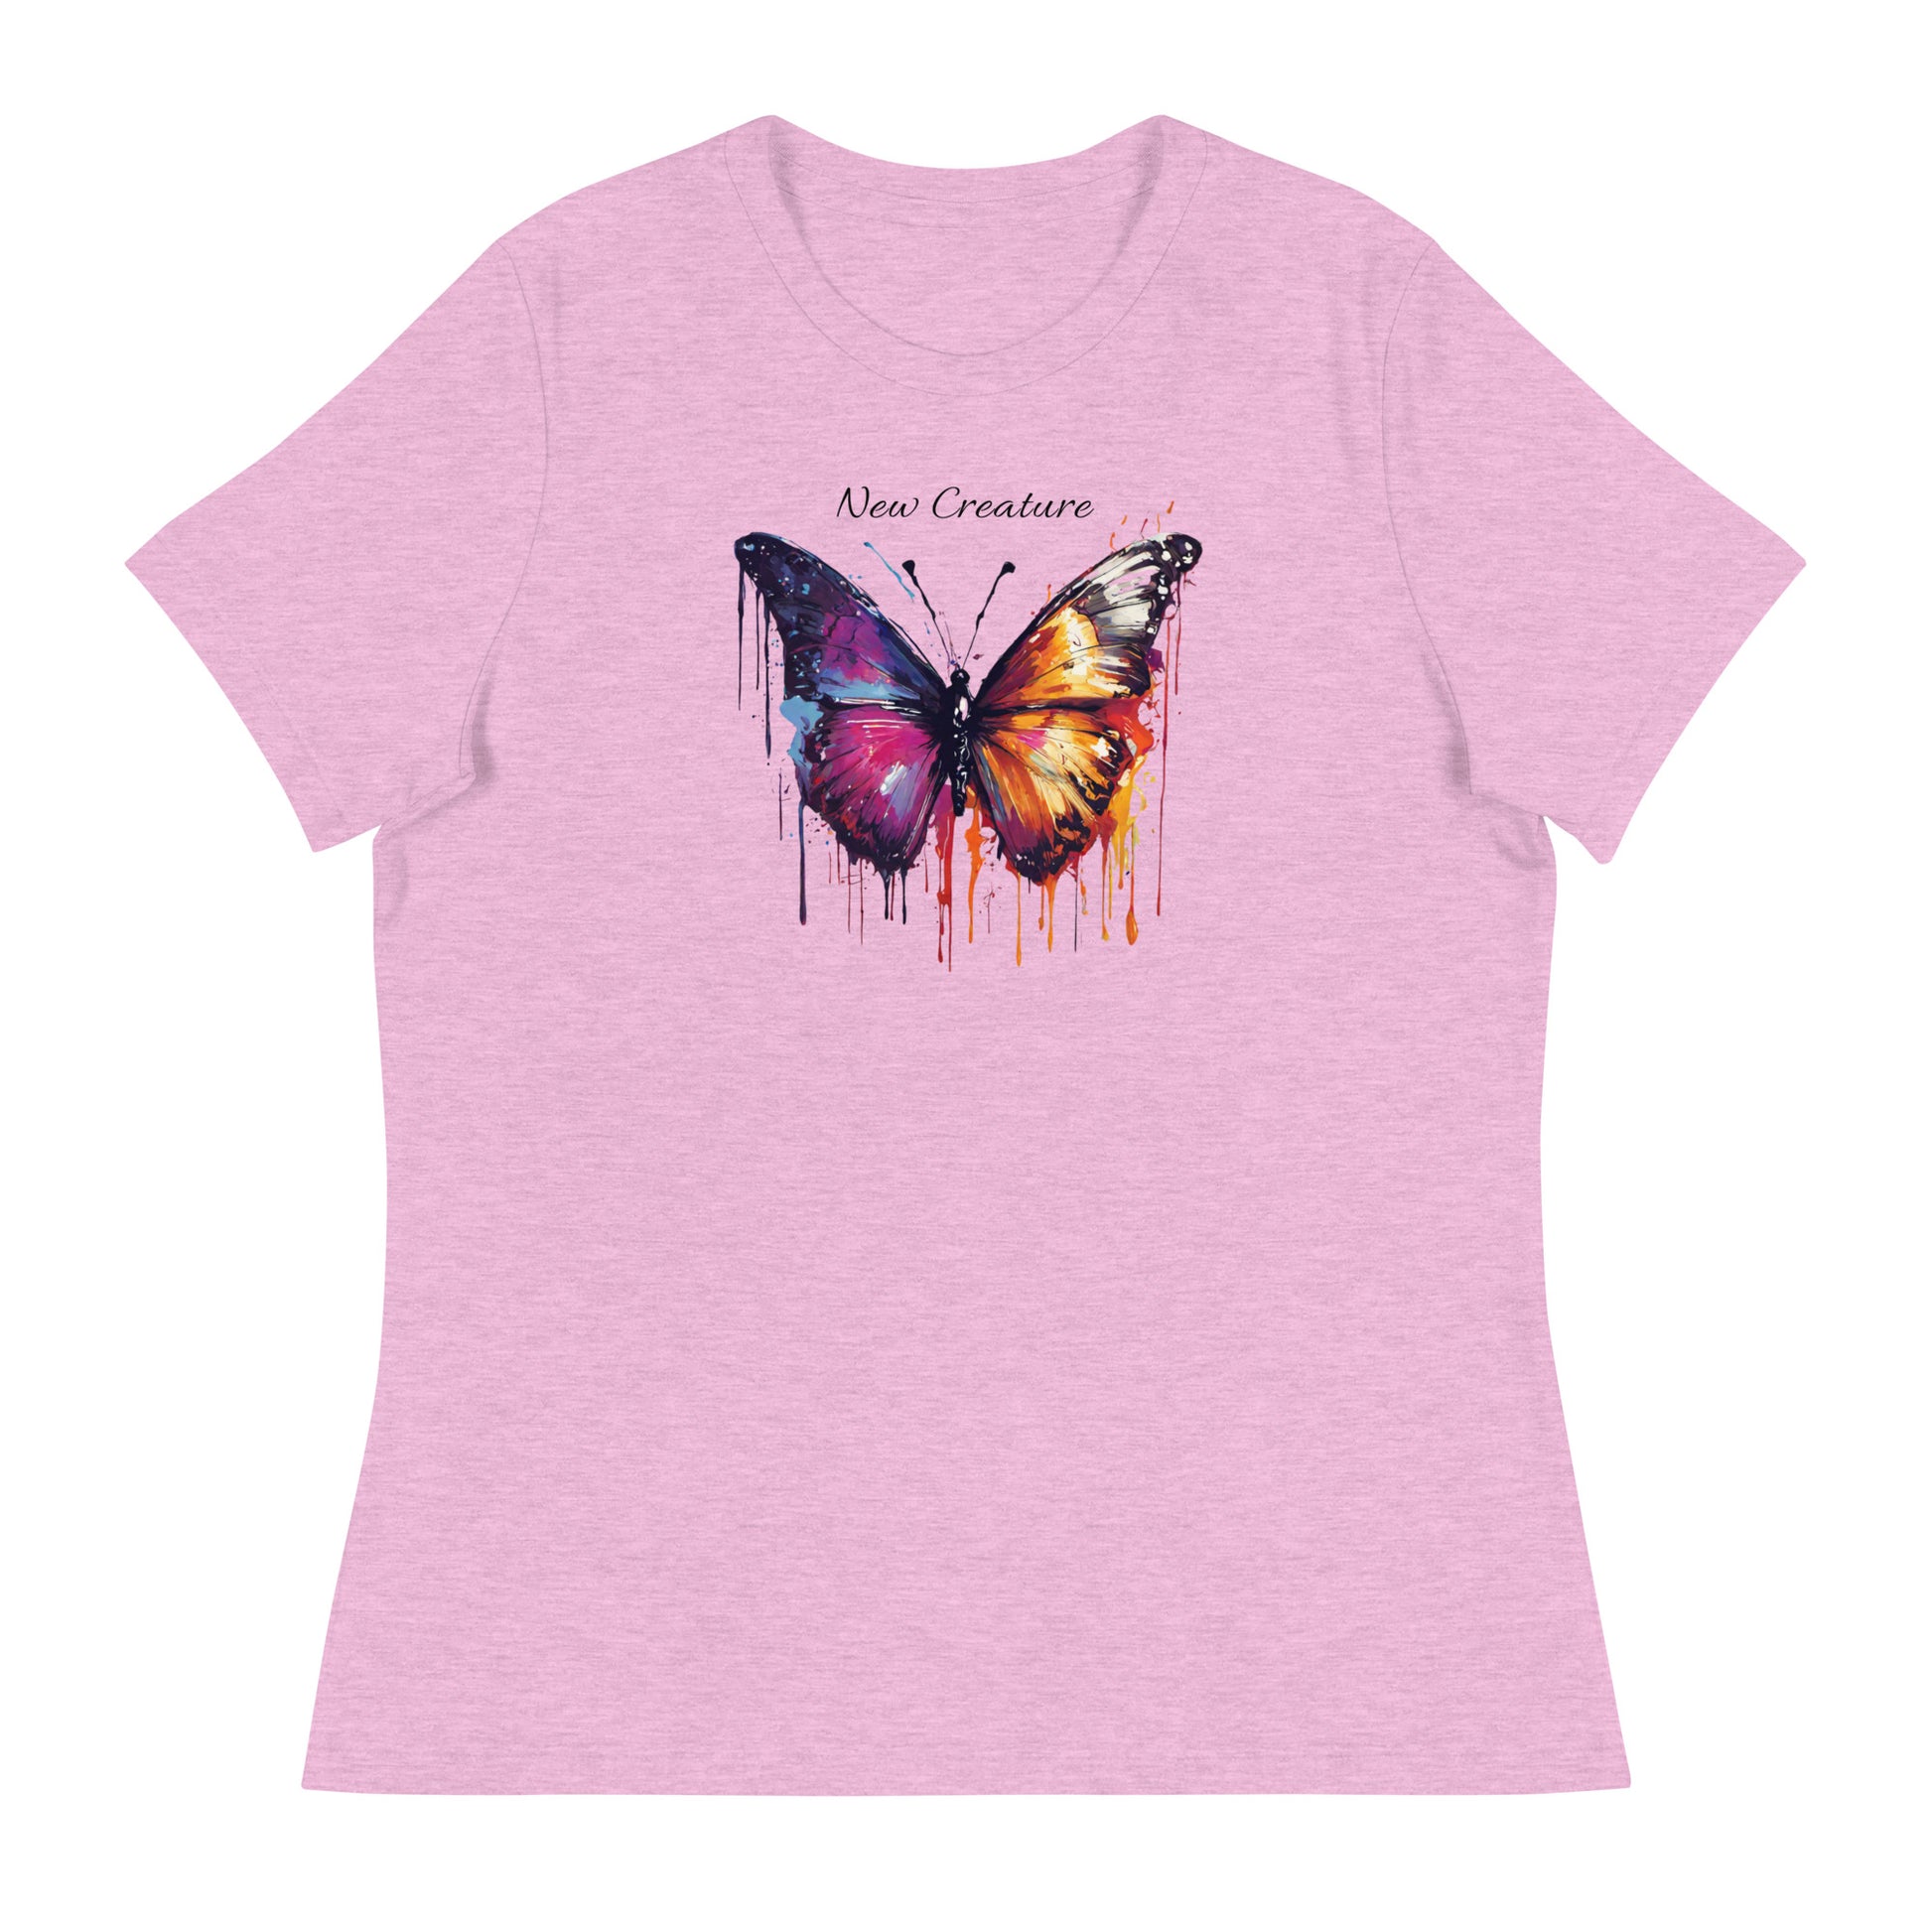 New Creature Christian Women's Beautiful Graphic T-Shirt Heather Prism Lilac